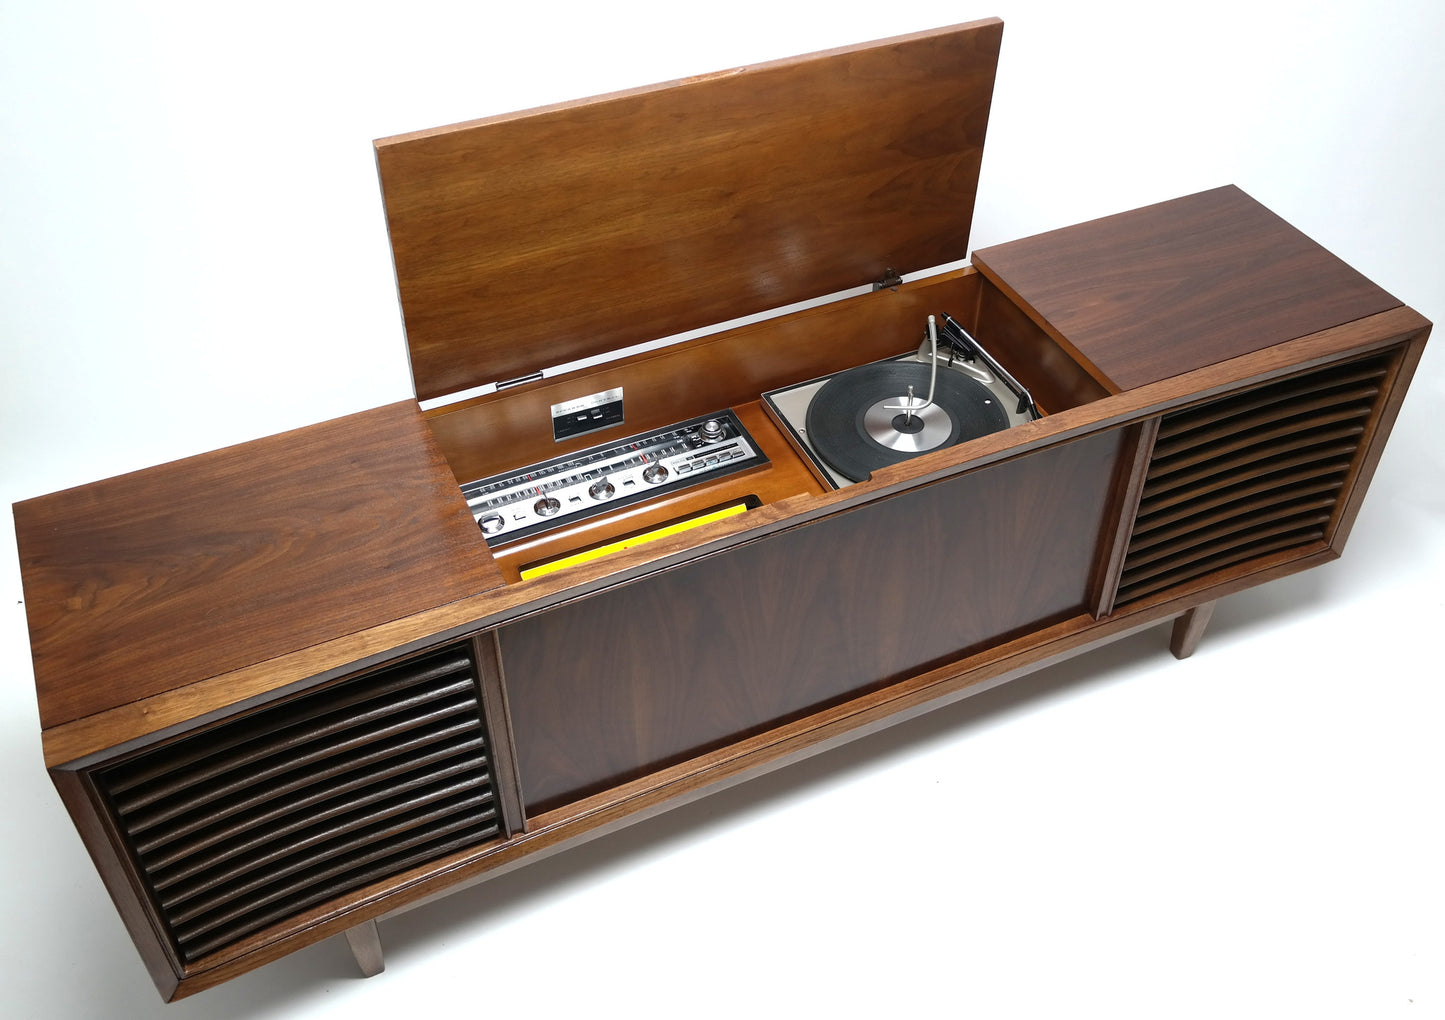 Mid Century Modern Philco Stereo Console Long and Low Record Player - Bluetooth iPod iPhone Android Input AM/FM Tuner The Vintedge Co.